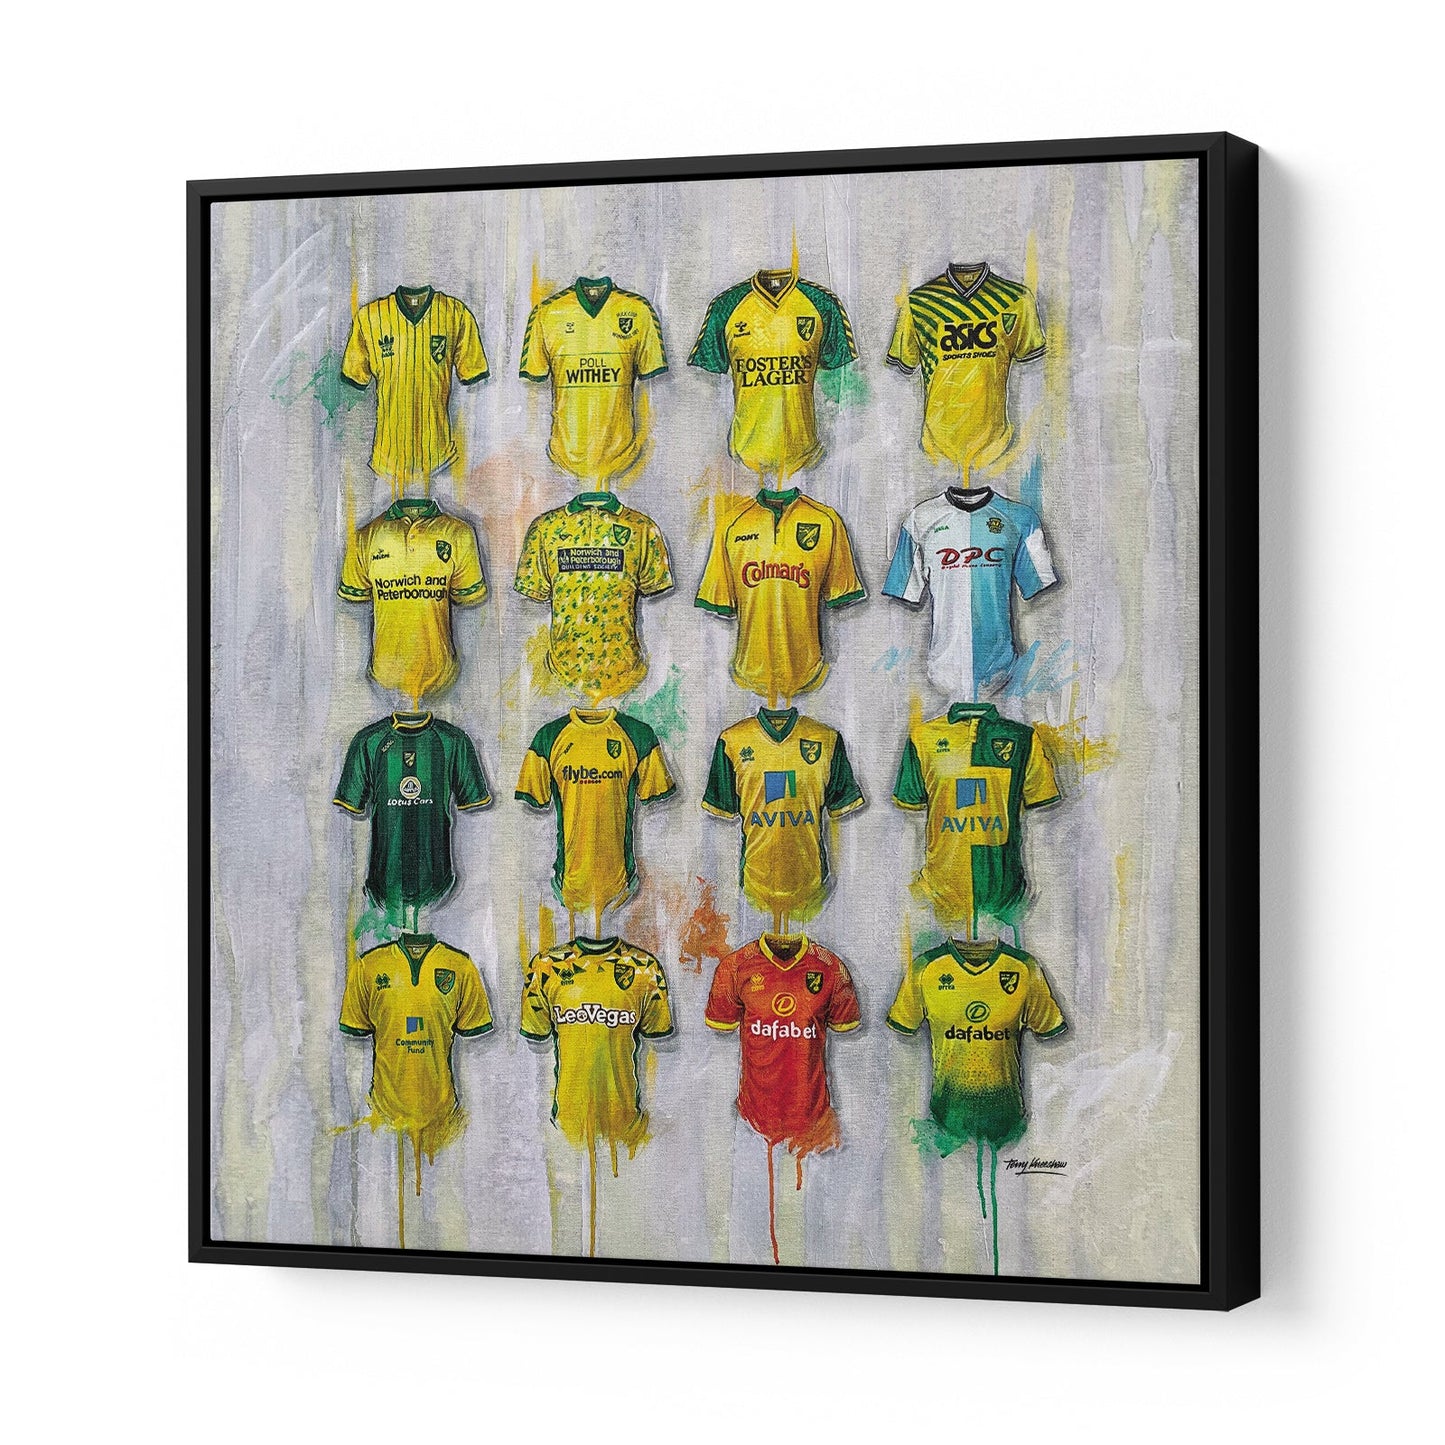 These Norwich canvases from Terry Kneeshaw are available in various sizes (20x20, 30x30, or 40x40) and framed or unframed in a black floating frame. The artwork showcases the team and its players in action, perfect for any fan or collector. Bring a piece of Carrow Road to your home or office decor with these high-quality canvases. The vibrant colors and attention to detail make these pieces a standout addition to any space.